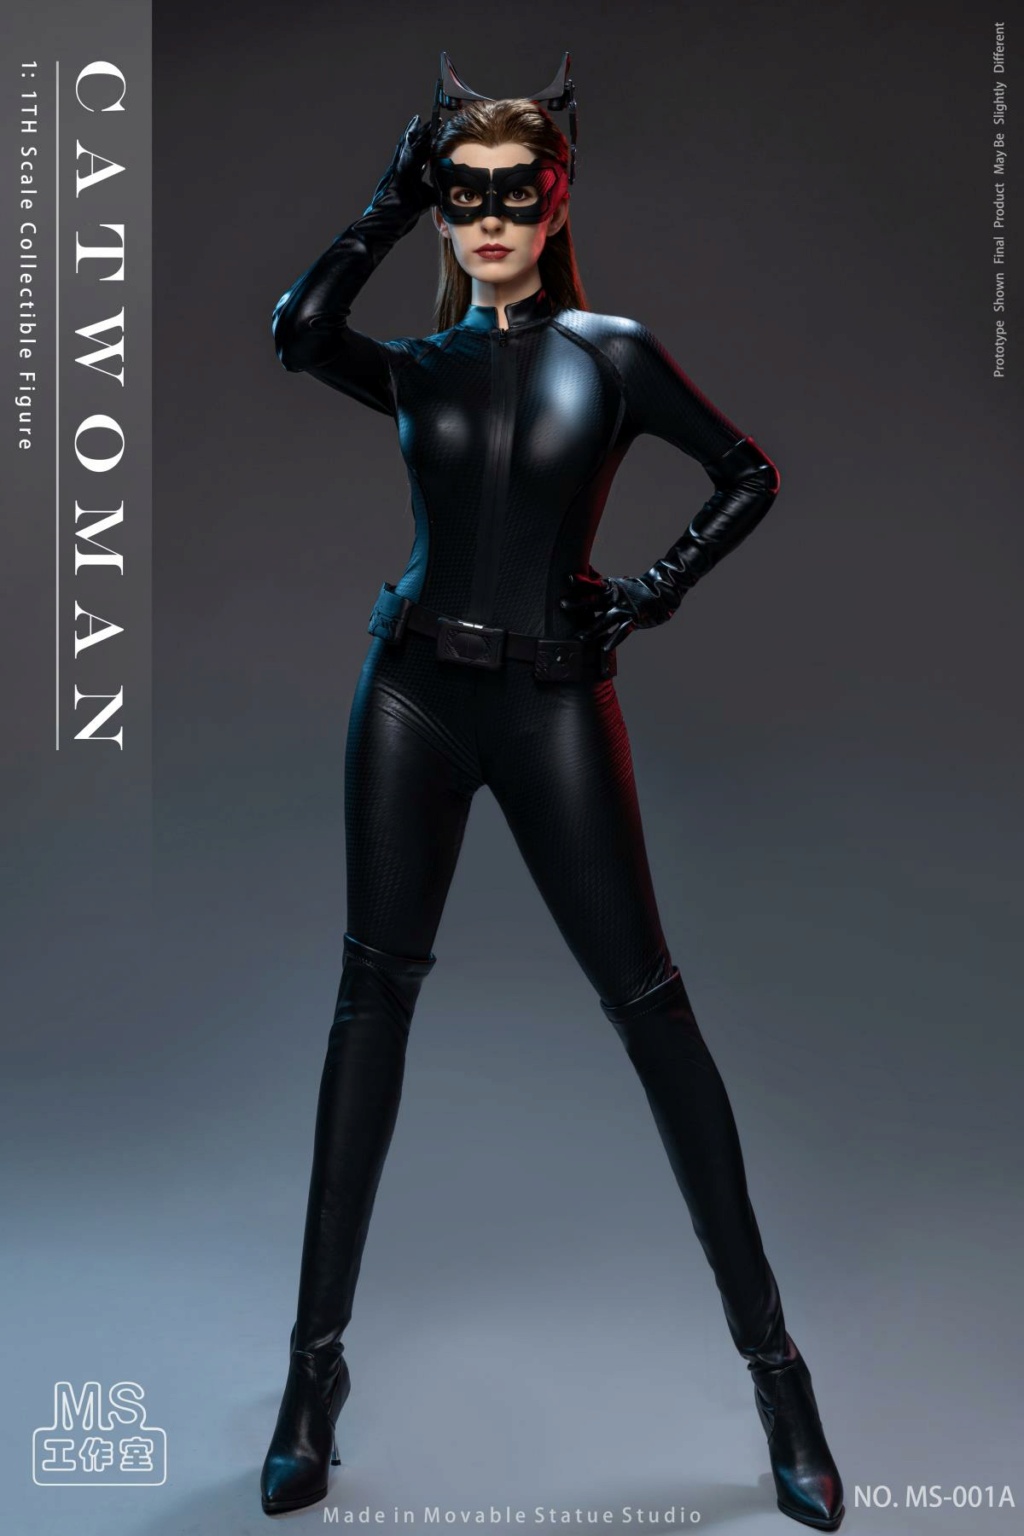 newproduct - NEW PRODUCT: MS Studio: Catwoman Movie Version 1/1 Proportion Catwoman Cherished Movable Figure “ Grand ” Age MS-001A 16142